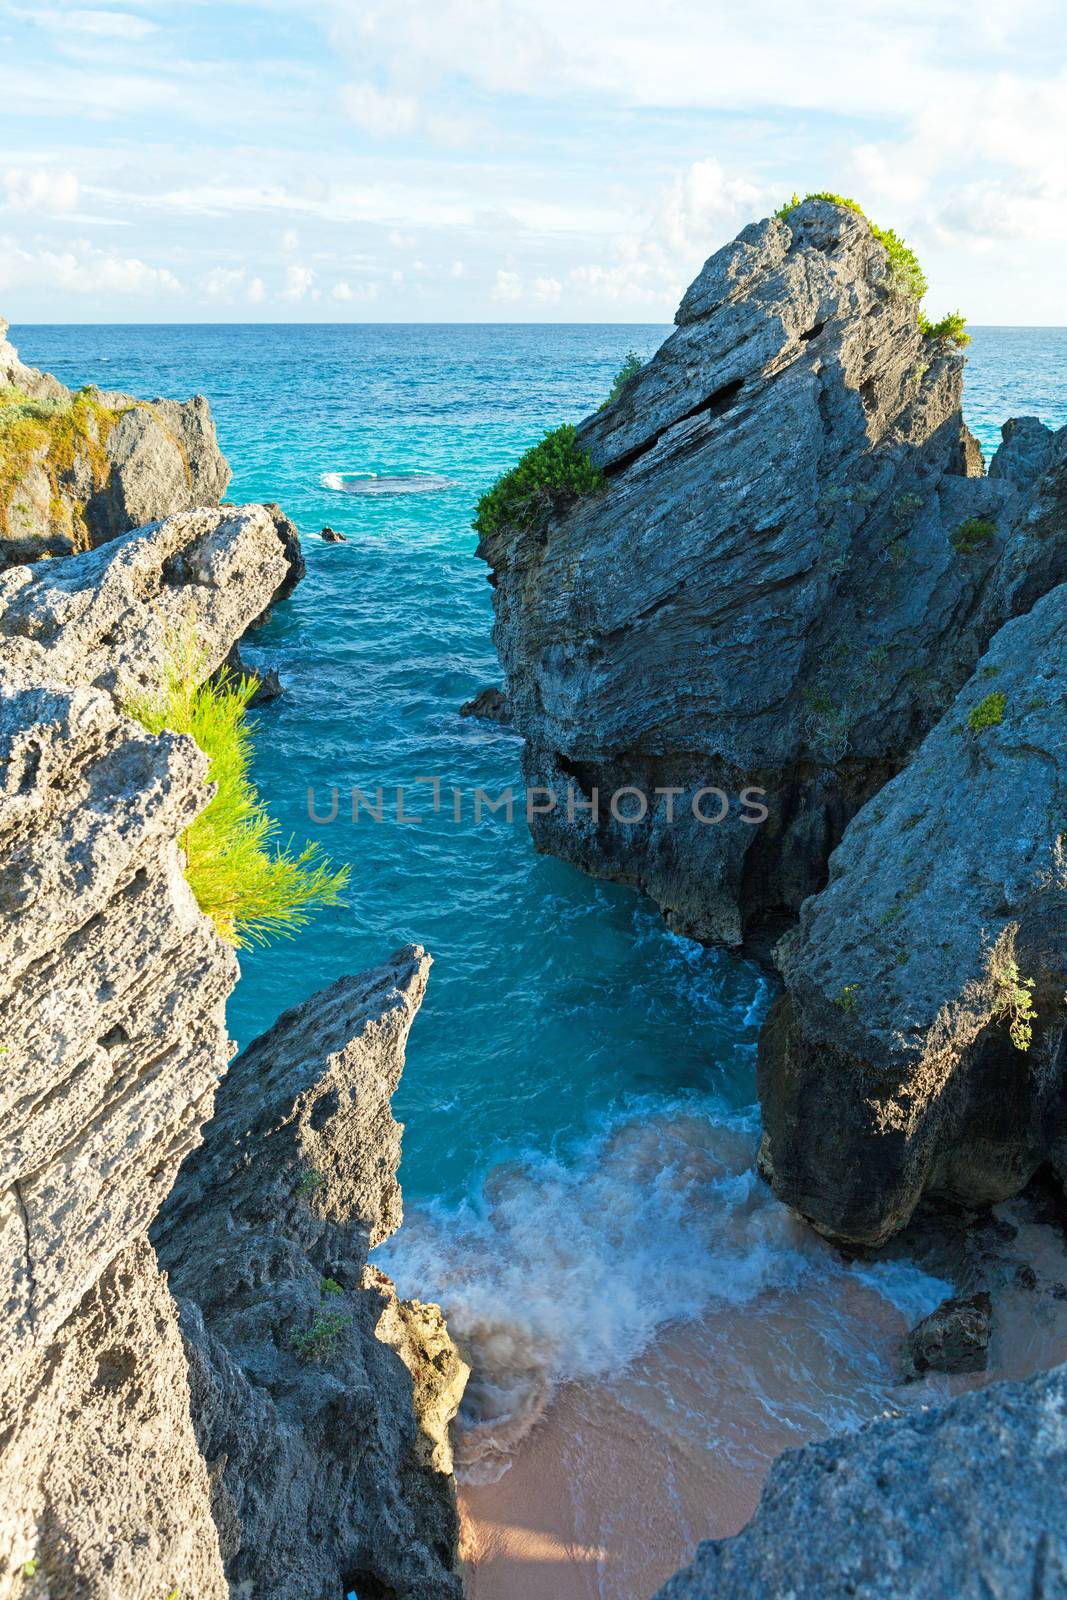 Bermuda Jobsons Cove by graficallyminded